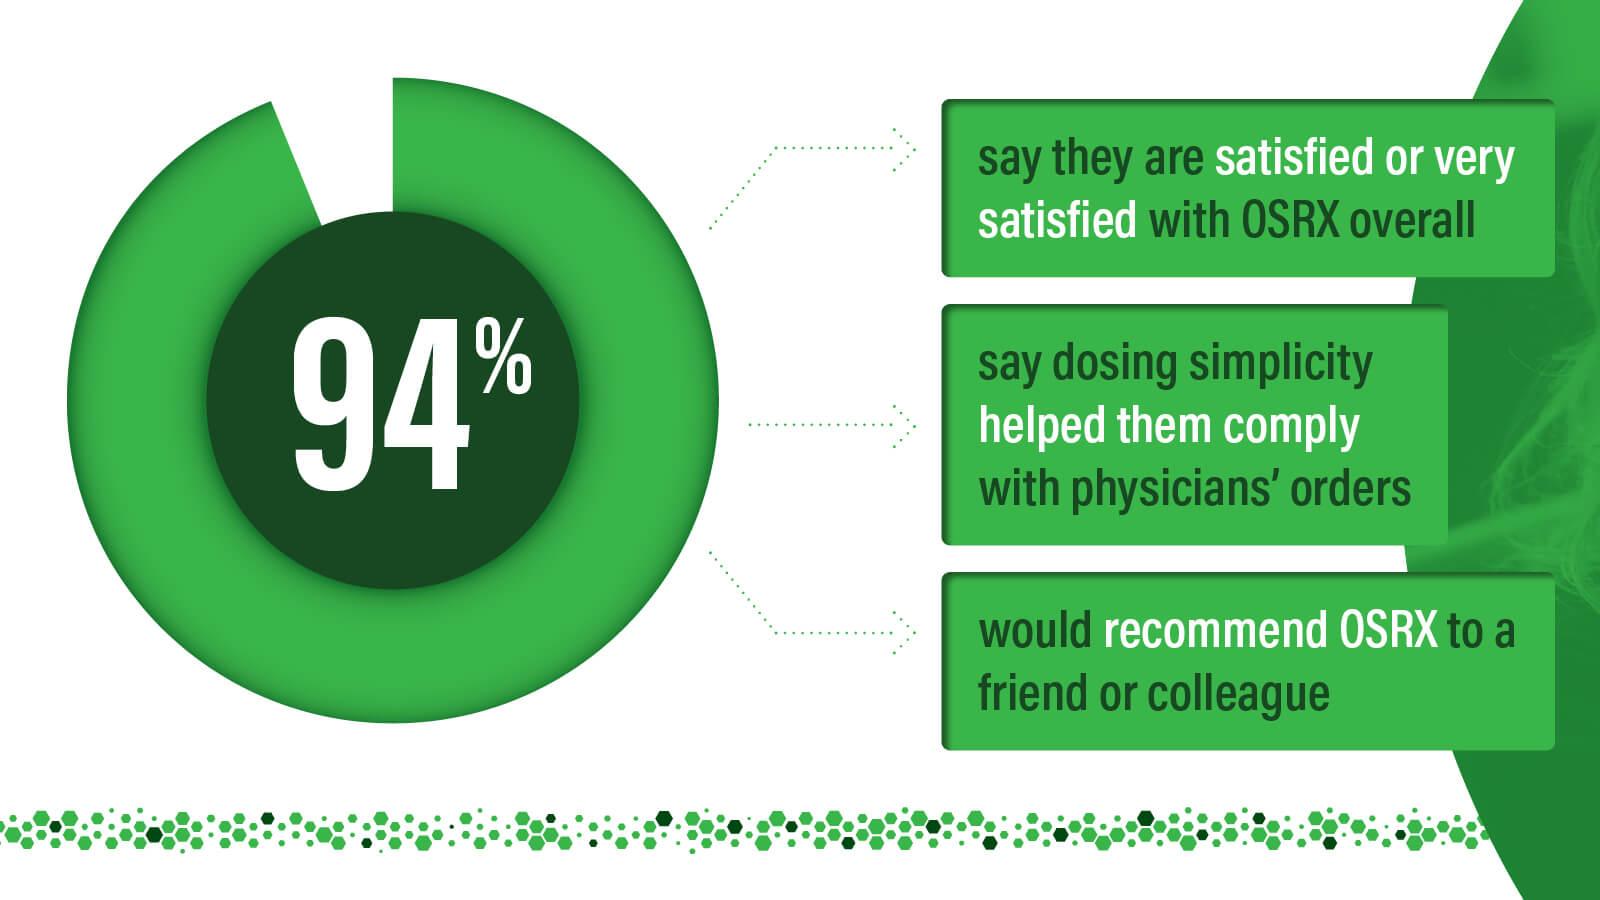 94% say they are satisfied or very satisfied with OSRX overall